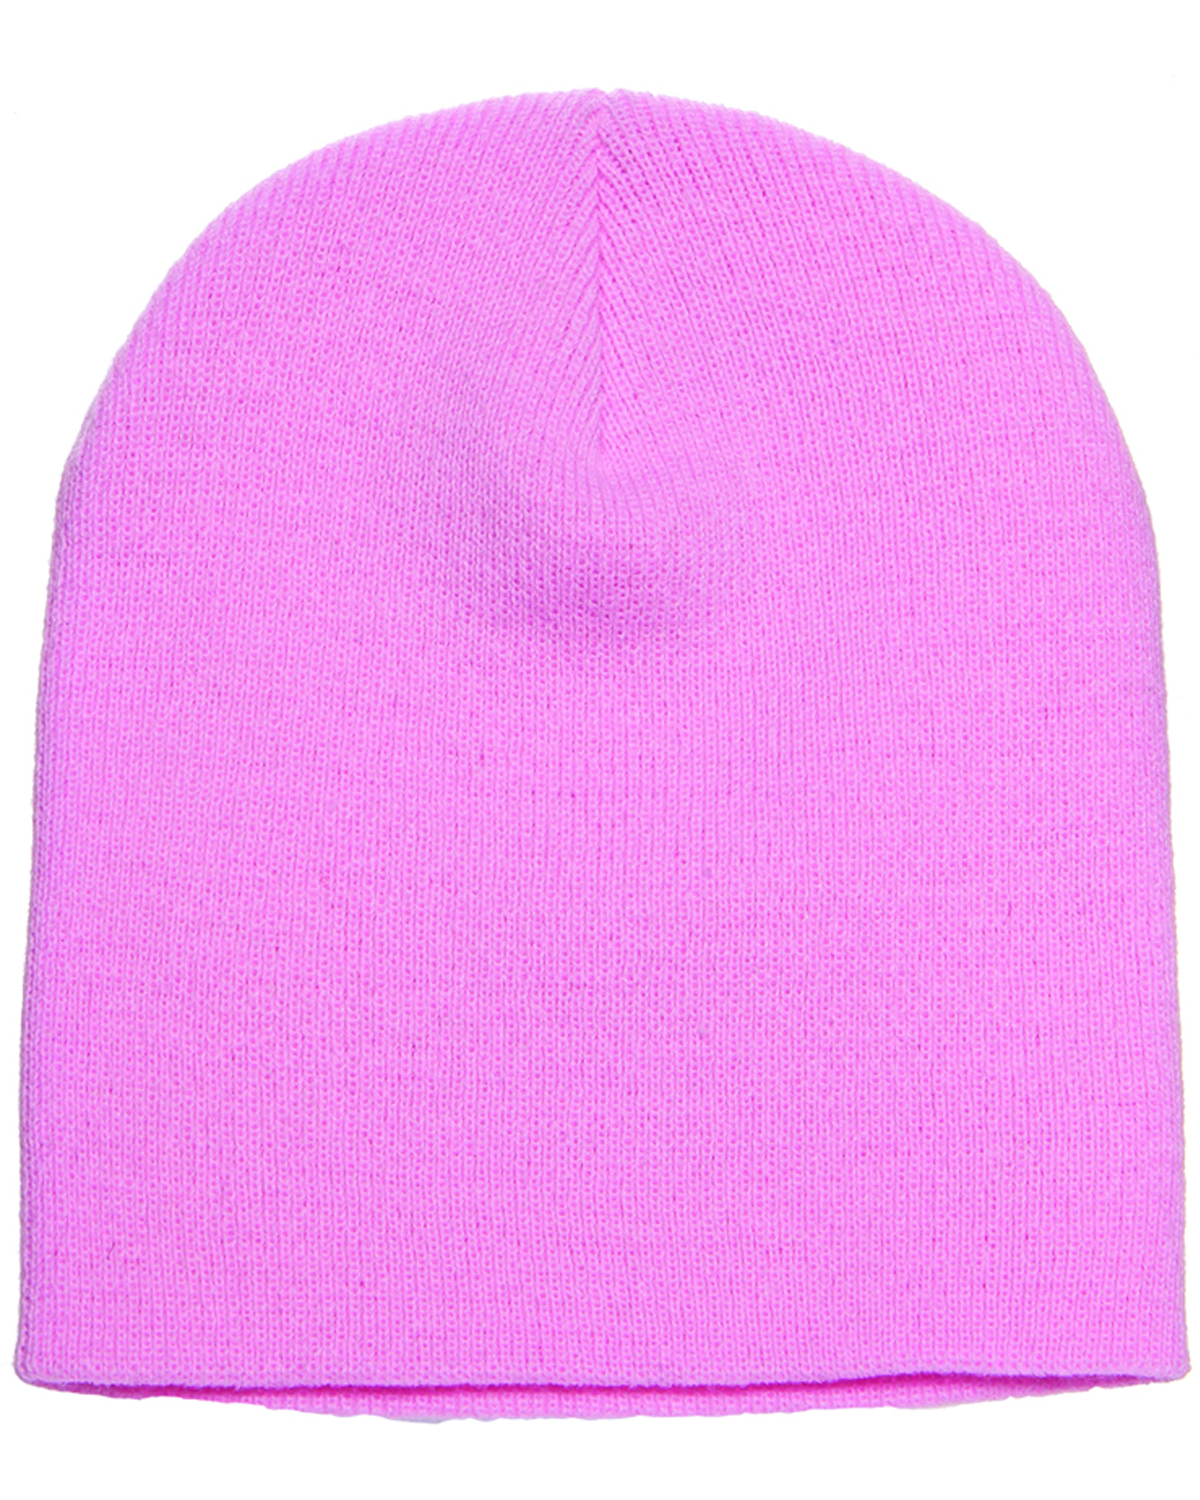 Yupoong 1500 | Adult Knit Beanie ShirtSpace 